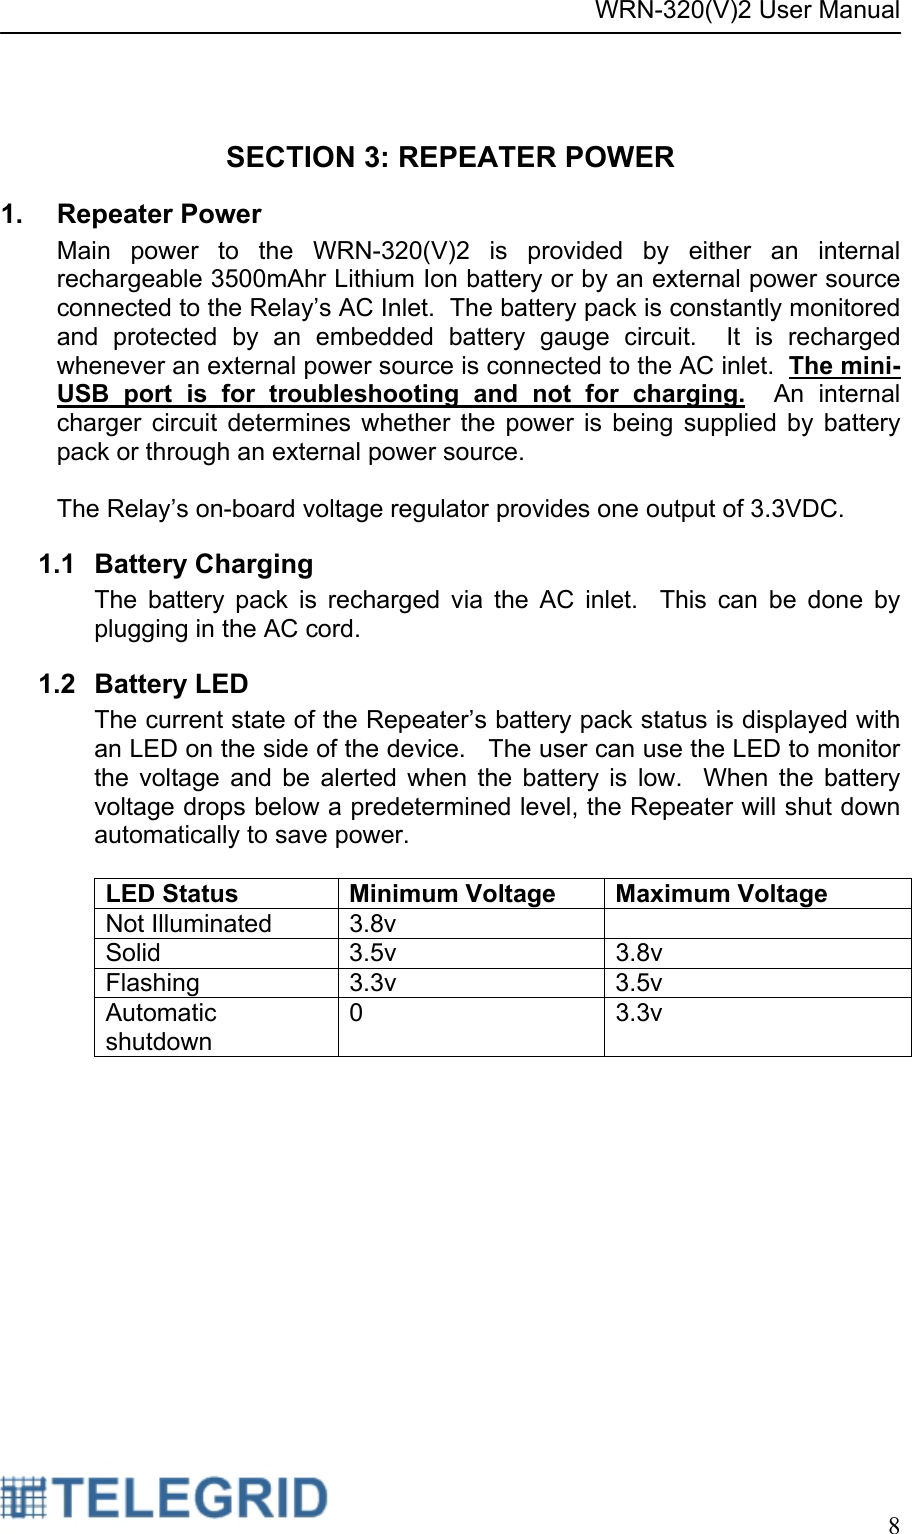 WRN-320(V)2 User Manual     8   SECTION 3: REPEATER POWER 1. Repeater Power Main power to the WRN-320(V)2 is provided by either an internal rechargeable 3500mAhr Lithium Ion battery or by an external power source connected to the Relay’s AC Inlet.  The battery pack is constantly monitored and protected by an embedded battery gauge circuit.  It is recharged whenever an external power source is connected to the AC inlet.  The mini-USB port is for troubleshooting and not for charging.  An internal charger circuit determines whether the power is being supplied by battery pack or through an external power source.    The Relay’s on-board voltage regulator provides one output of 3.3VDC. 1.1 Battery Charging The battery pack is recharged via the AC inlet.  This can be done by plugging in the AC cord.   1.2 Battery LED The current state of the Repeater’s battery pack status is displayed with an LED on the side of the device.   The user can use the LED to monitor the voltage and be alerted when the battery is low.  When the battery voltage drops below a predetermined level, the Repeater will shut down automatically to save power.  LED Status  Minimum Voltage Maximum Voltage Not Illuminated  3.8v   Solid 3.5v  3.8v Flashing   3.3v  3.5v Automatic shutdown 0 3.3v 